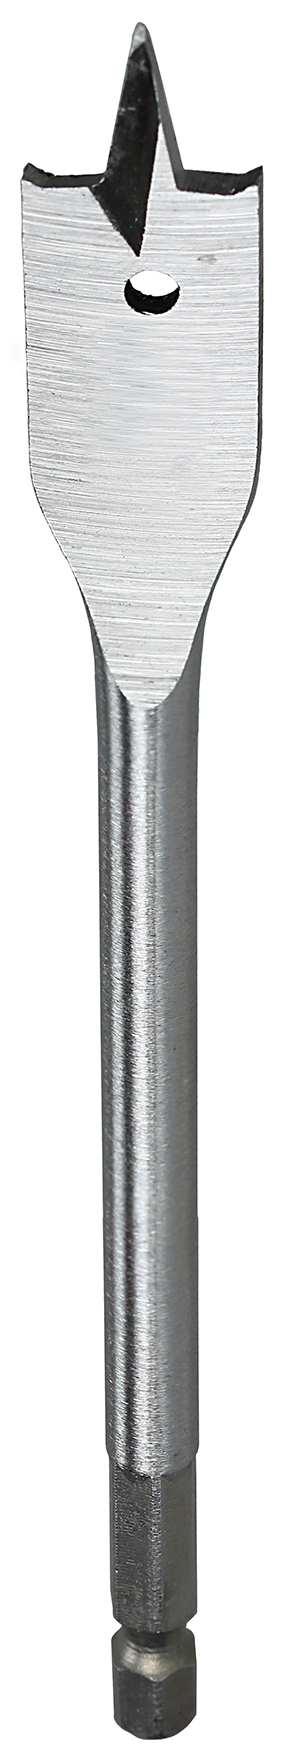 Spade Drill Bit, 3/8 in. Size, Hex shank type, Cold Forged Steel material, 6 in. drilling depth